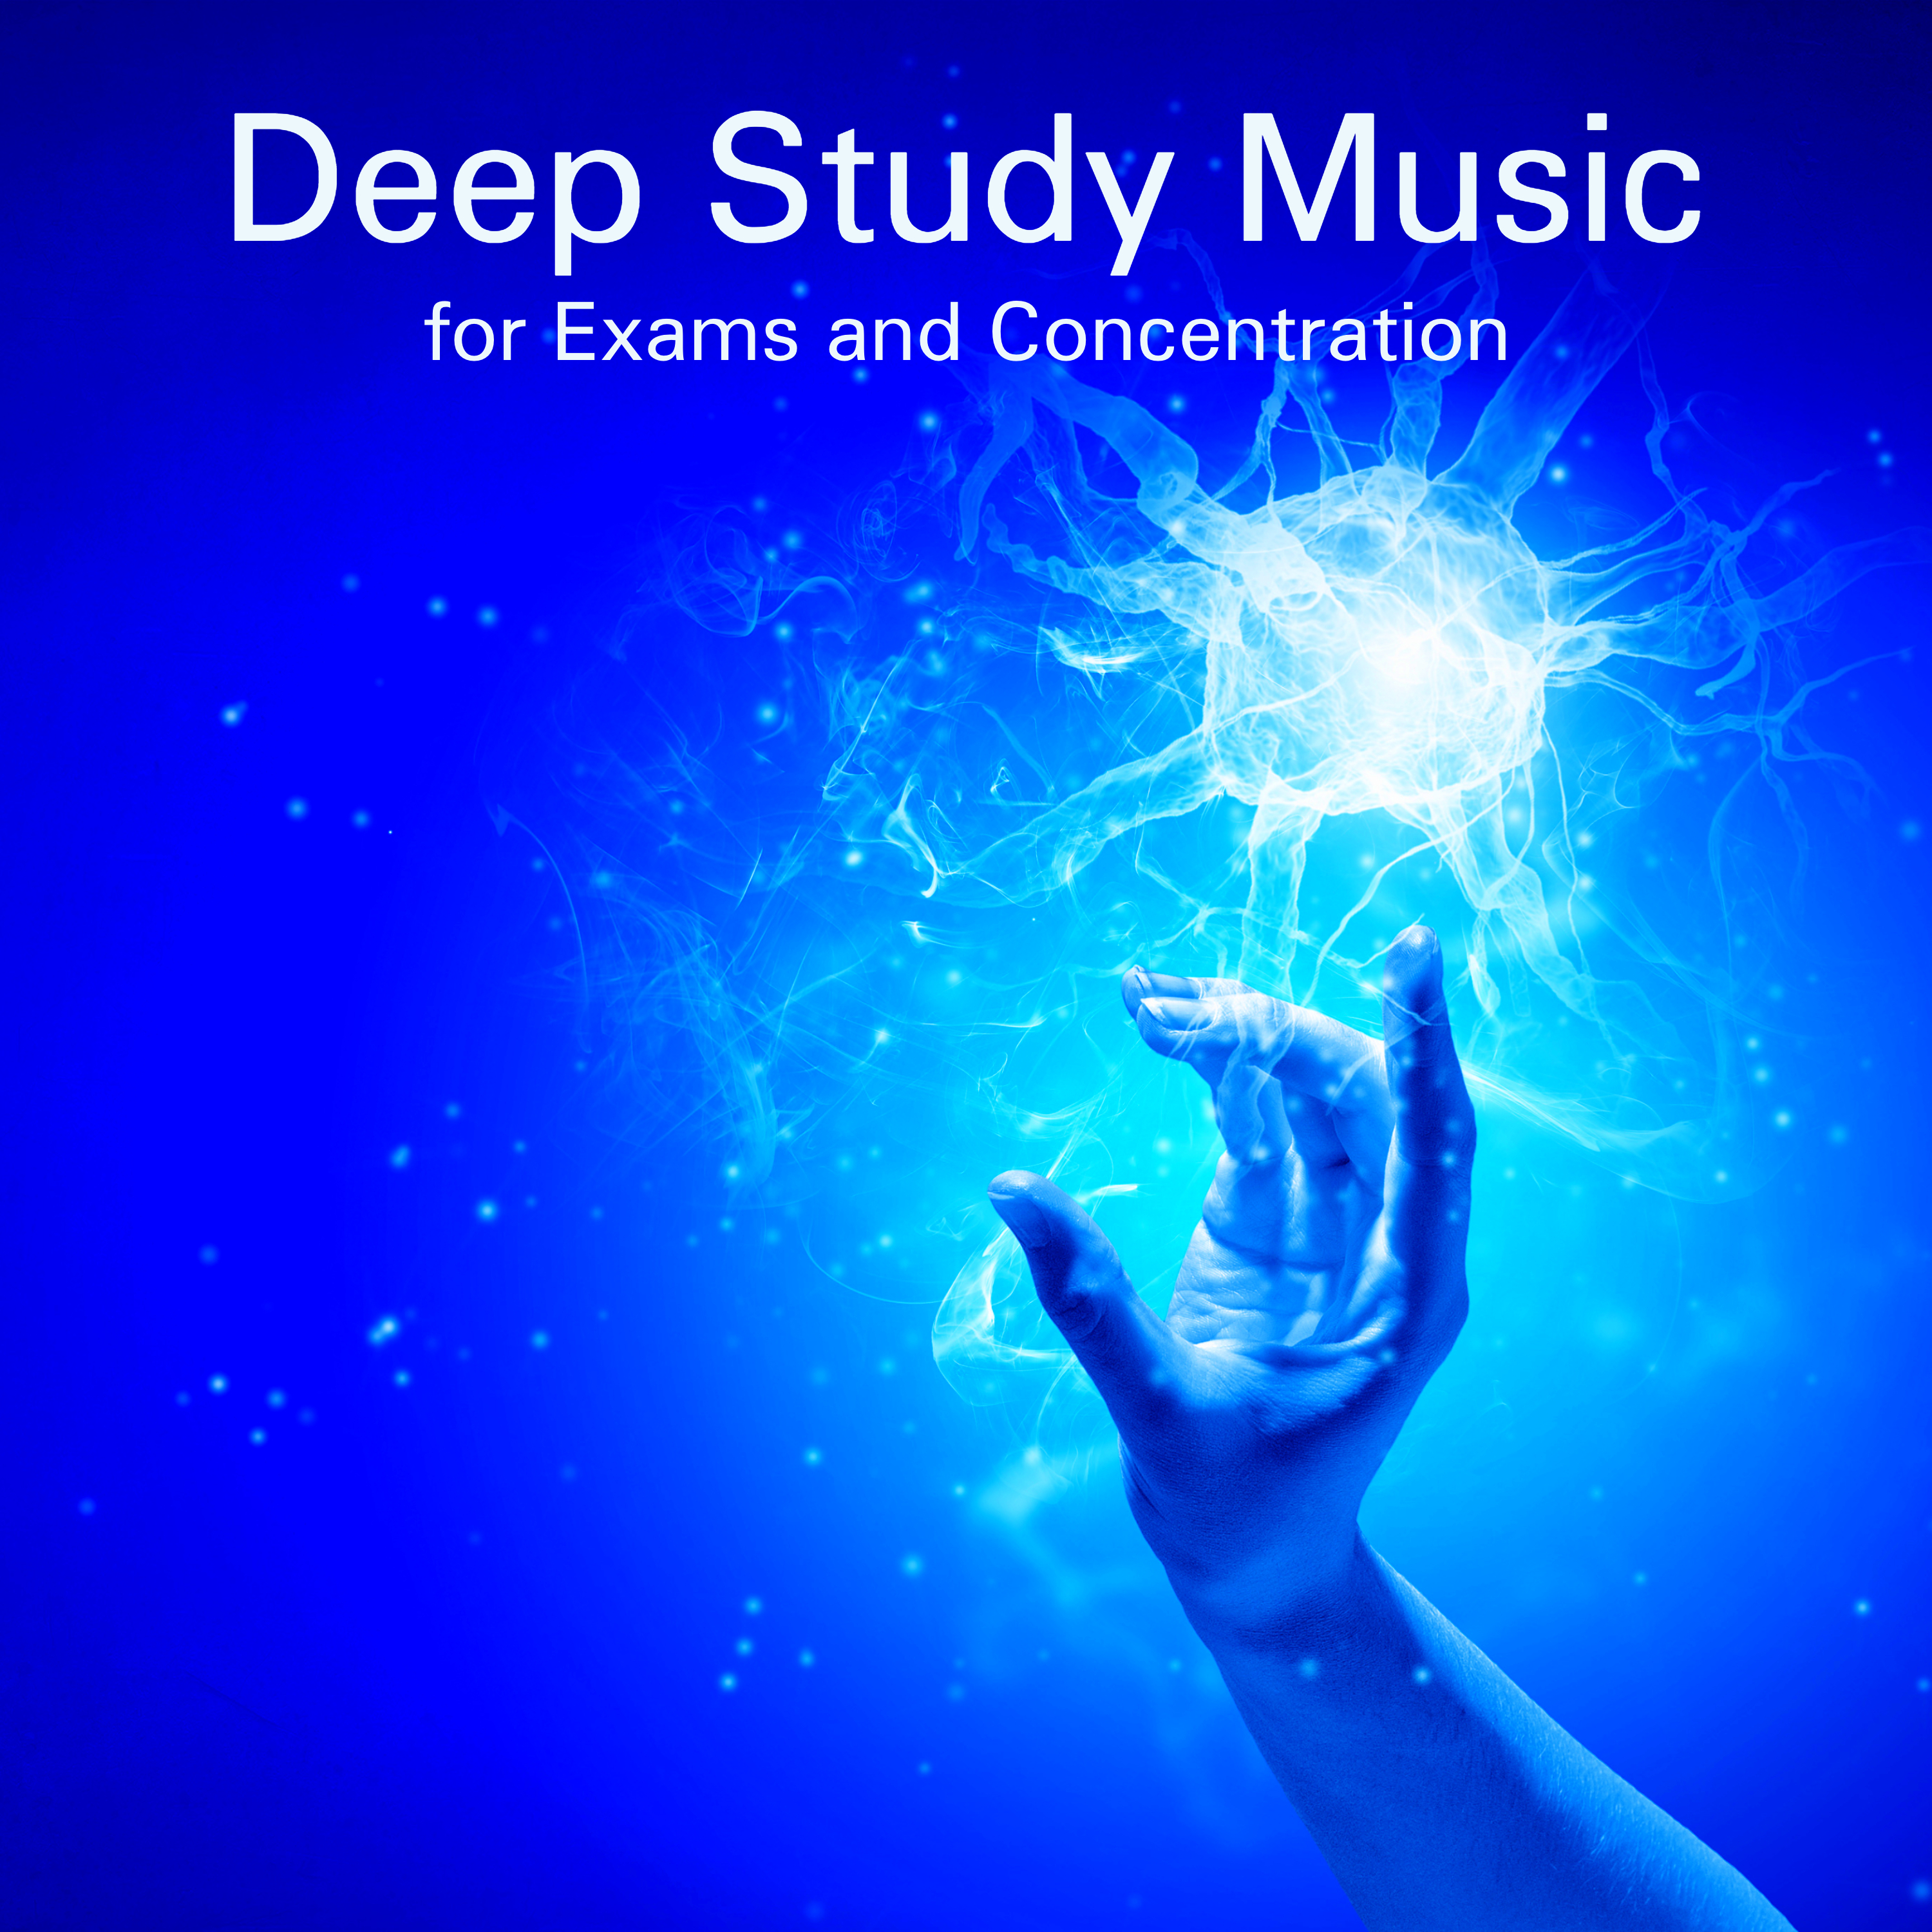 Deepen Your Concentration